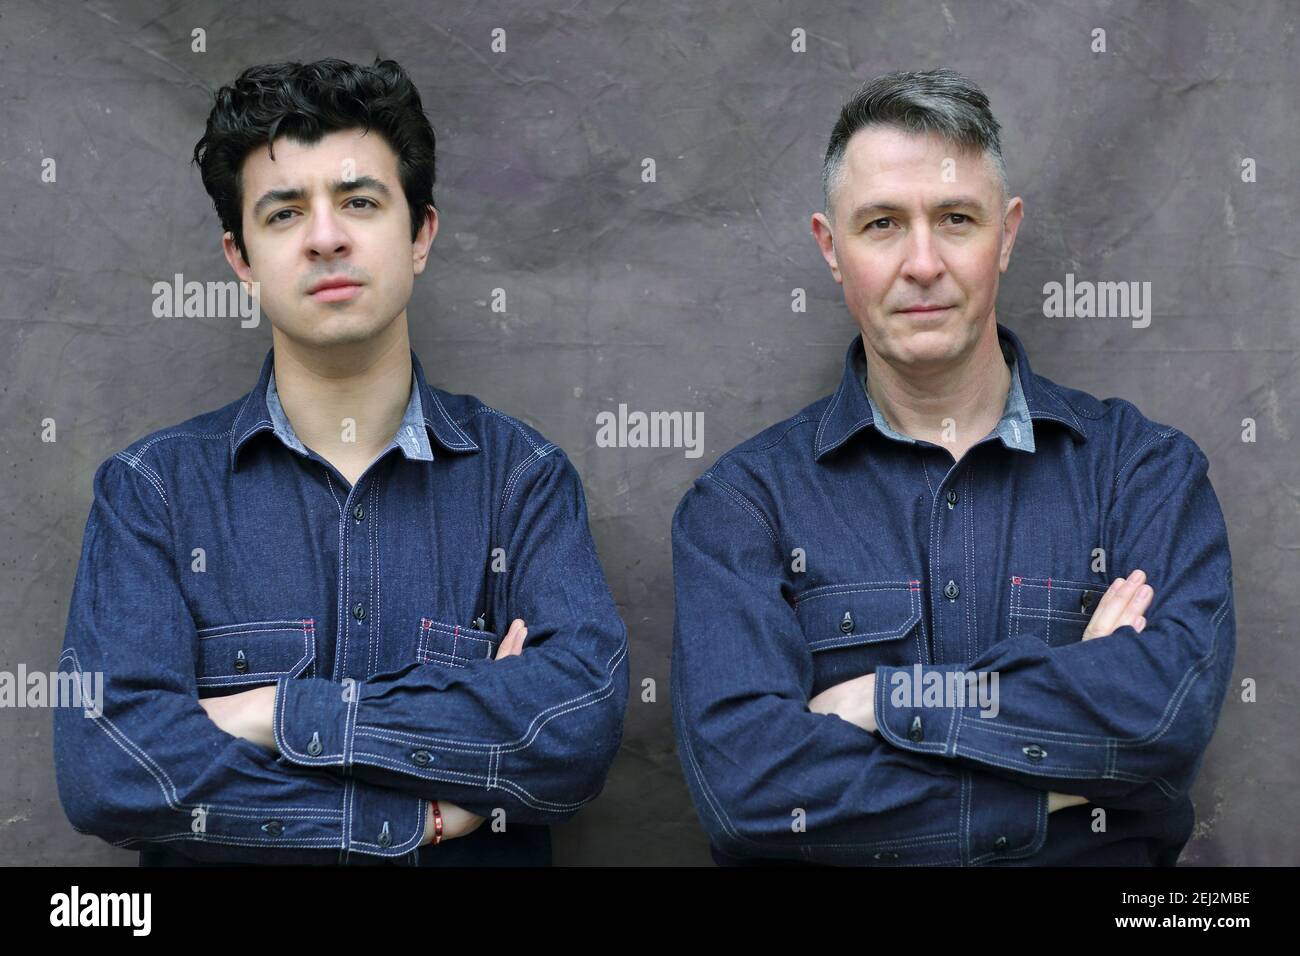 Father and son wearing same jeans shirts. Stock Photo